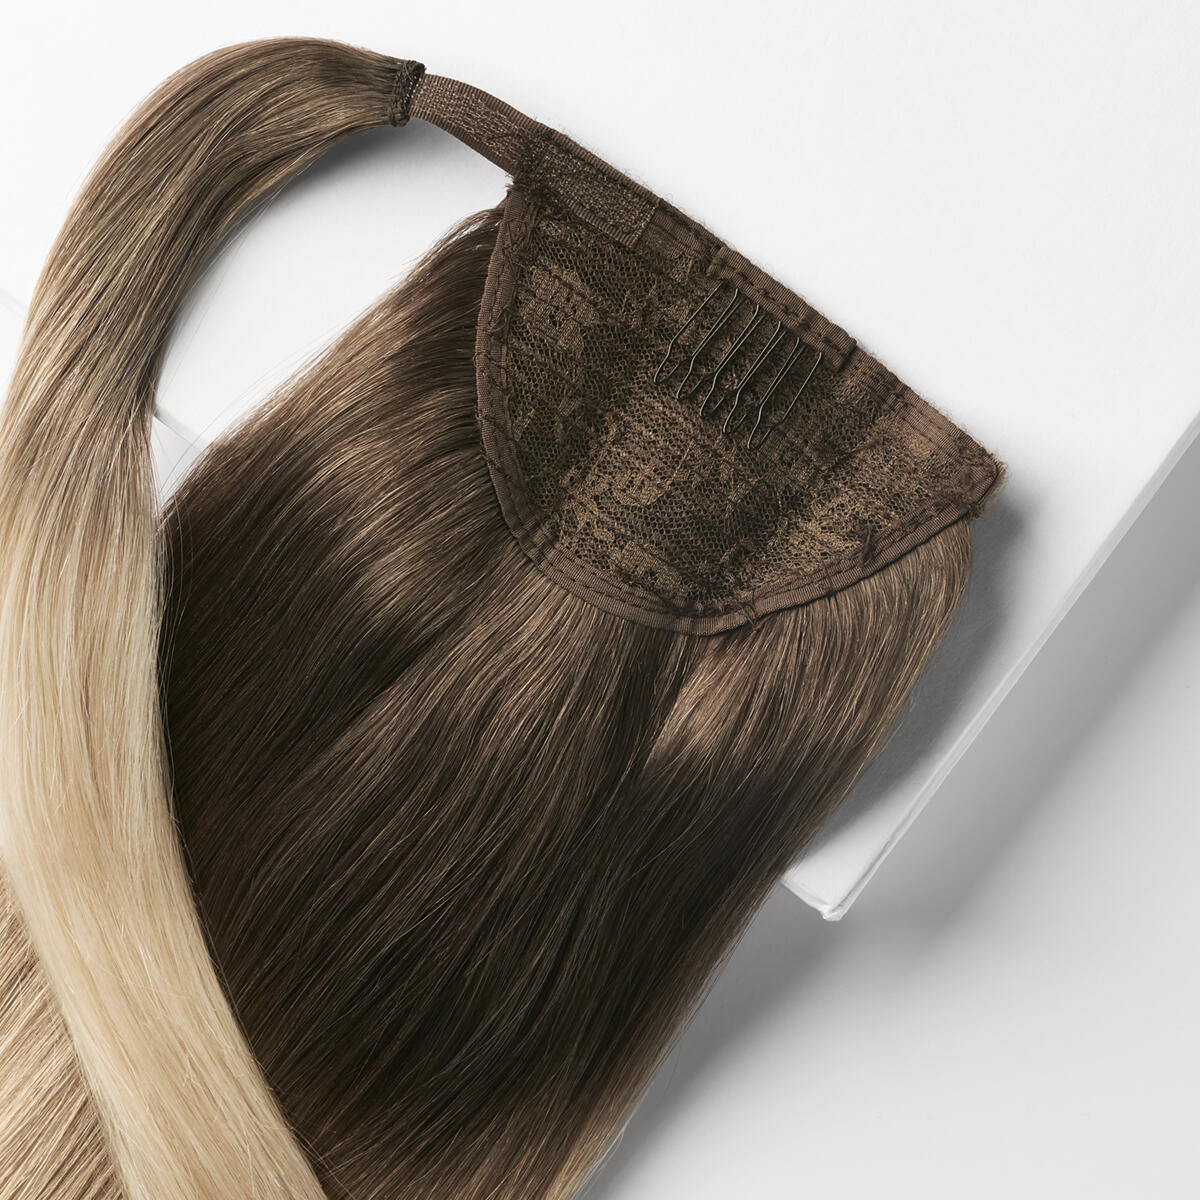 Clip-in Ponytail O2.6/8.0 Dark Ash Blond Ombre 50 cm